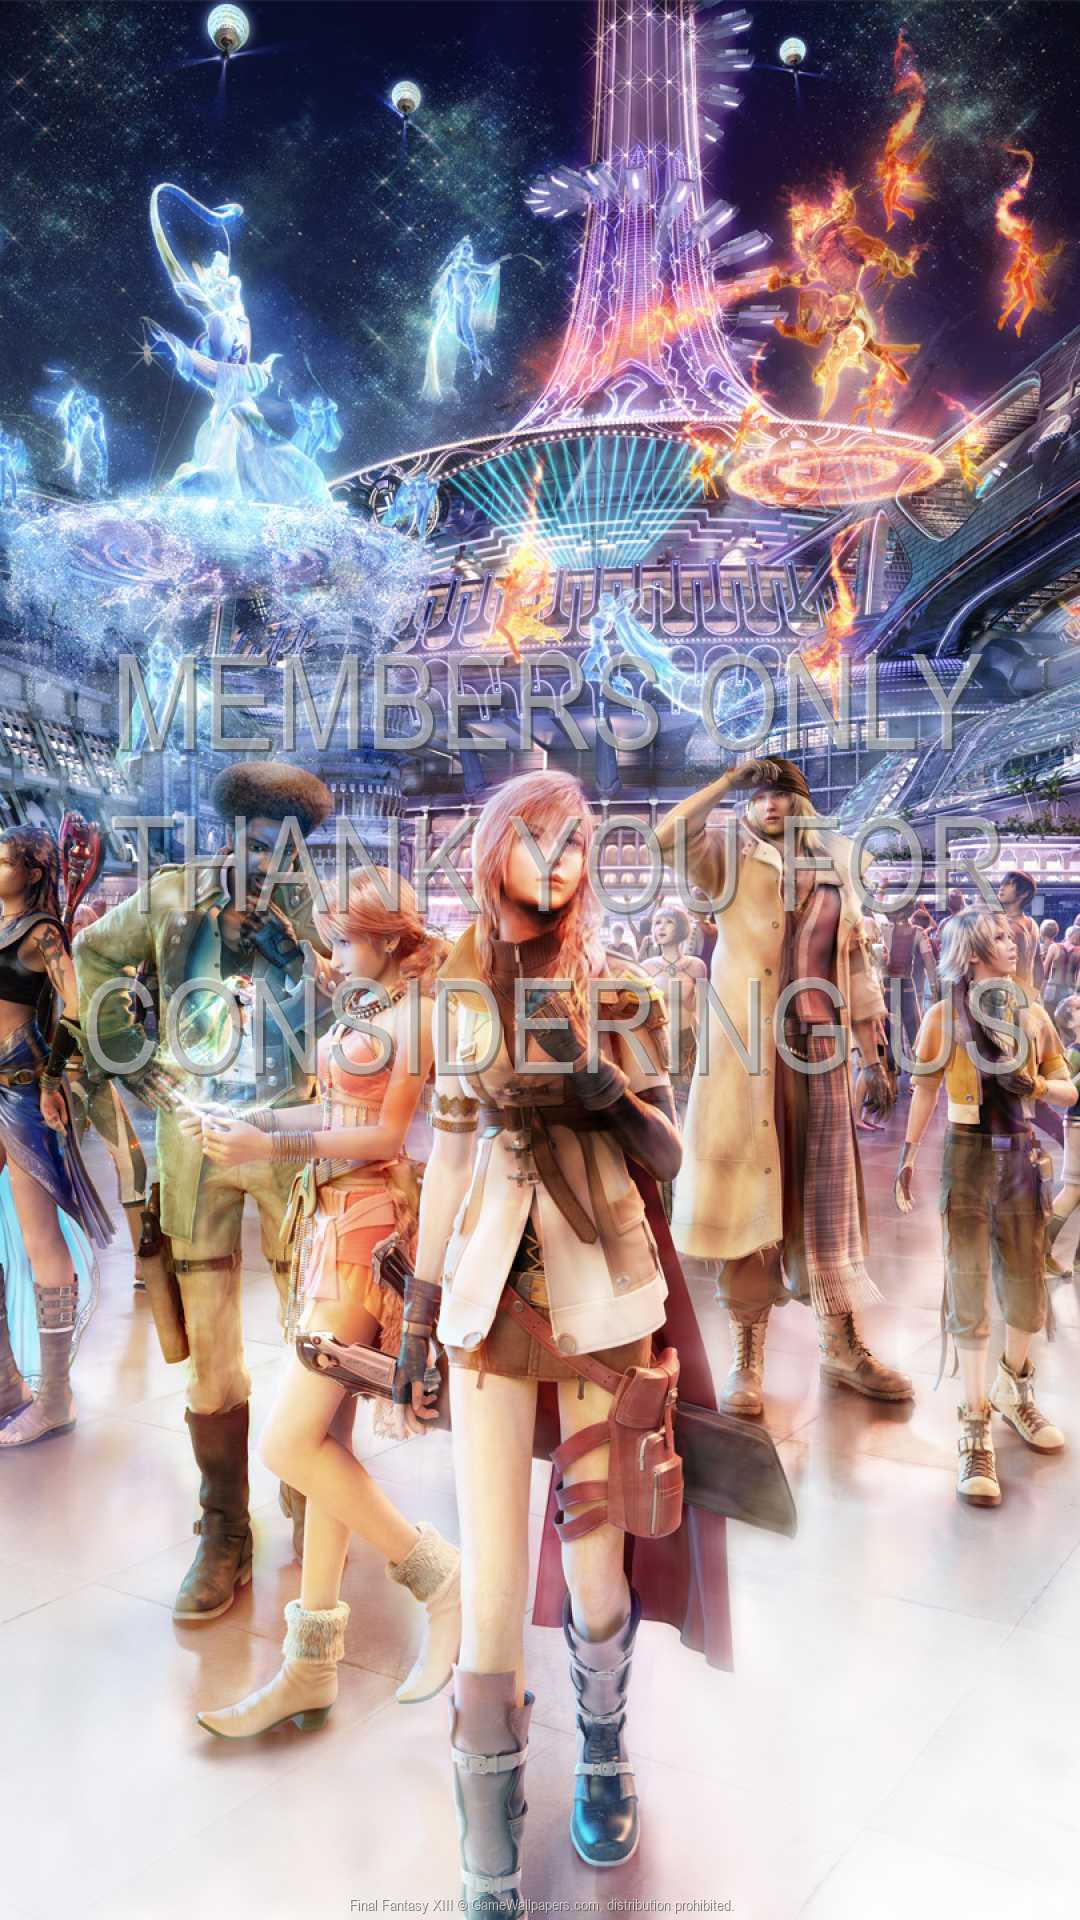 Final Fantasy XIII 1080p Vertical Mobile wallpaper or background 11